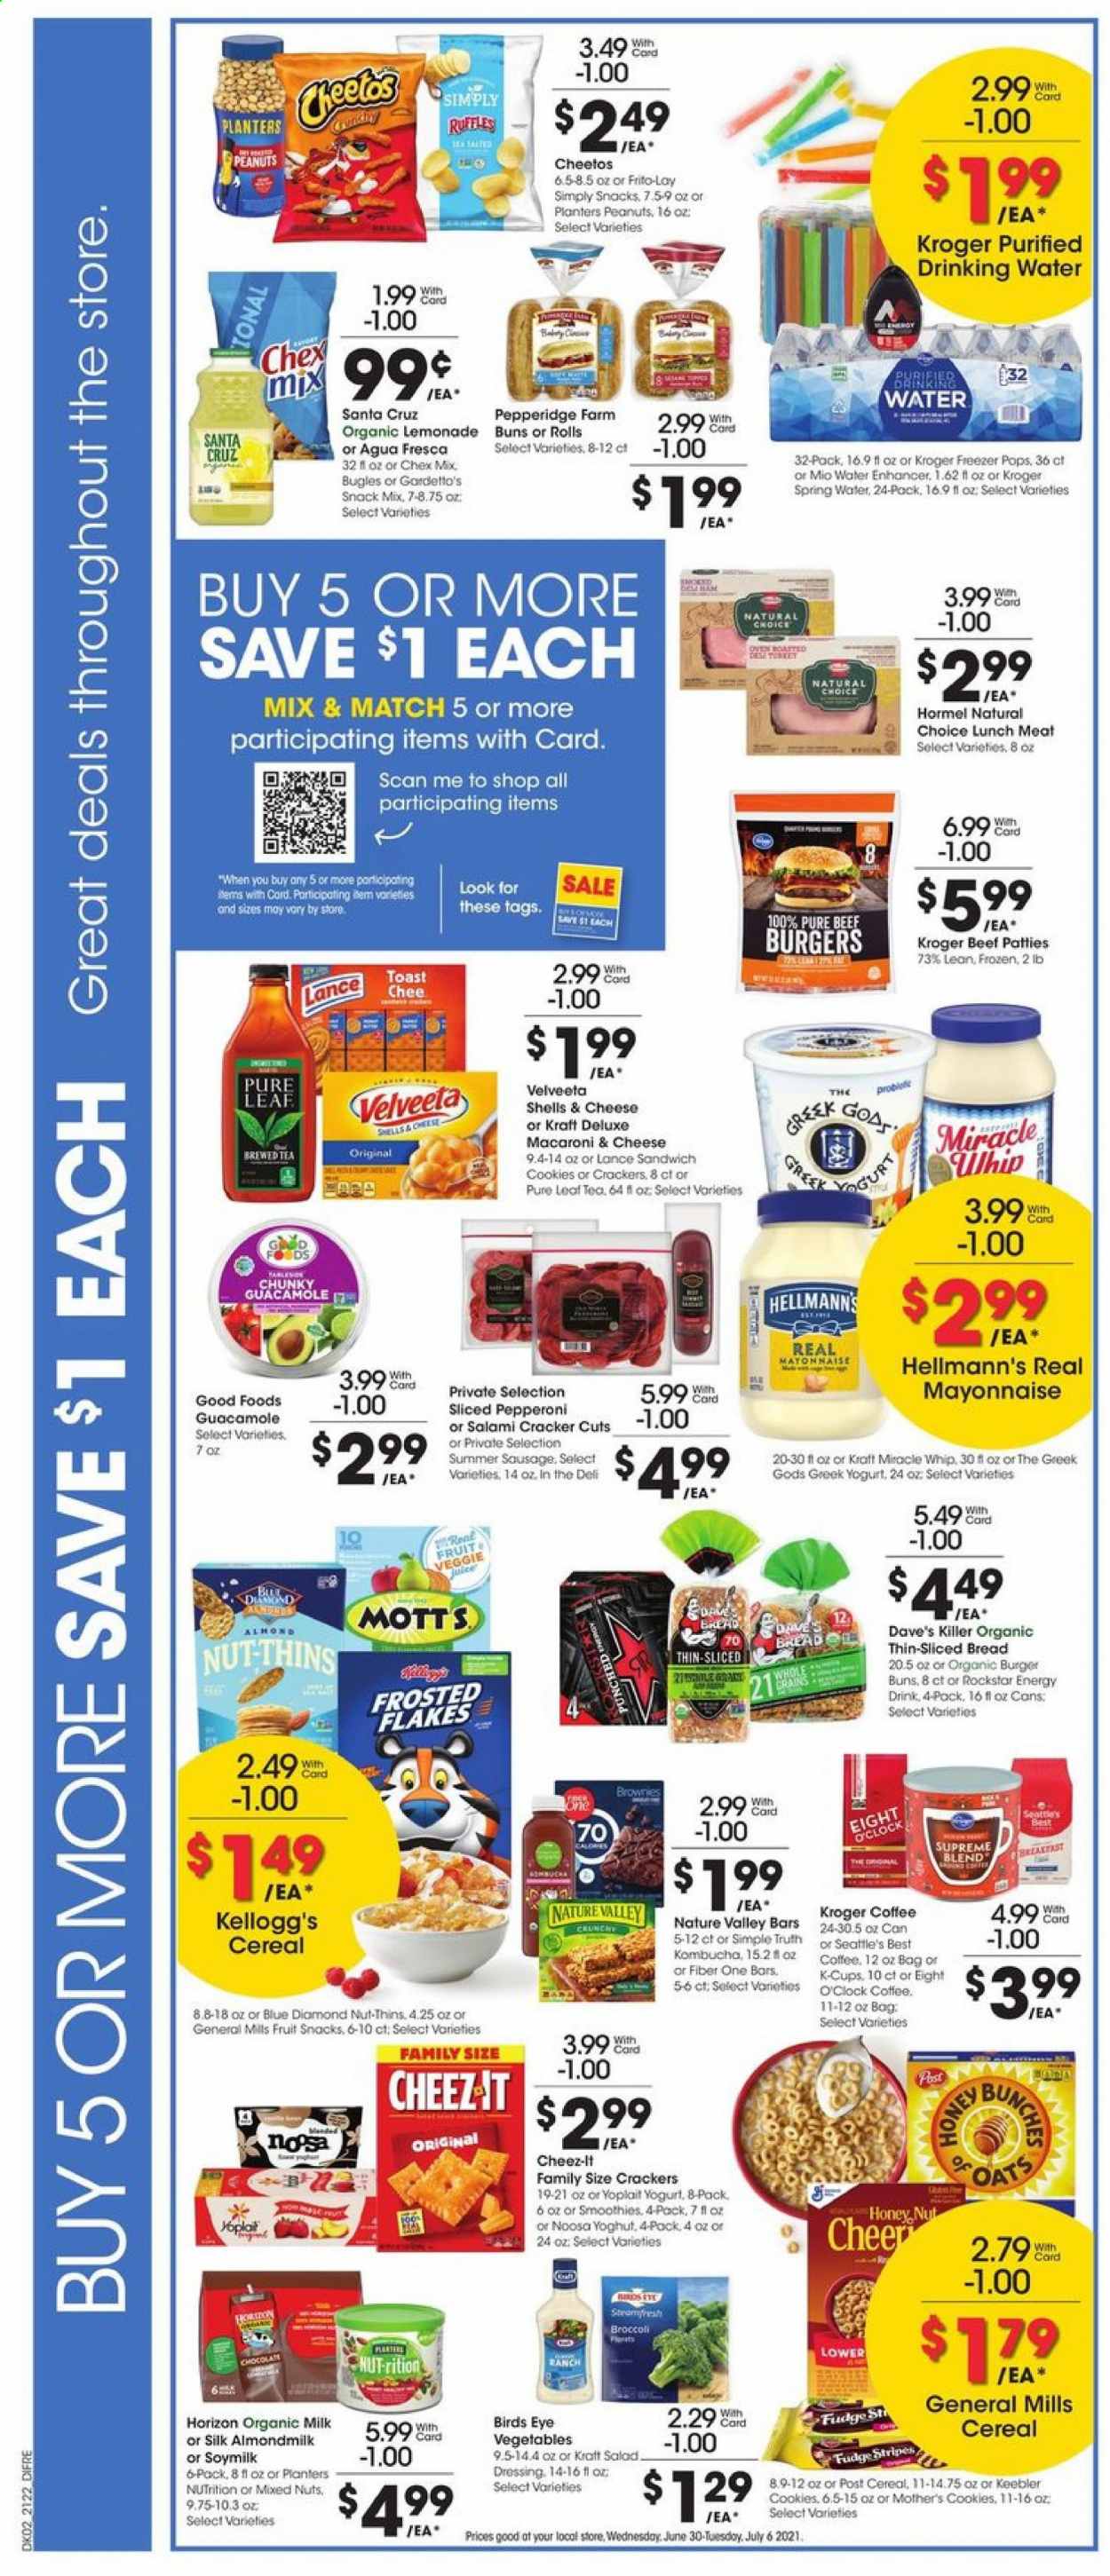 thumbnail - Baker's Flyer - 06/30/2021 - 07/06/2021 - Sales products - bread, buns, burger buns, brownies, broccoli, Mott's, cod, macaroni & cheese, sandwich, Bird's Eye, beef burger, Kraft®, Hormel, salami, sausage, summer sausage, pepperoni, guacamole, lunch meat, greek yoghurt, yoghurt, Yoplait, almond milk, soy milk, organic milk, Silk, mayonnaise, Miracle Whip, Hellmann’s, cookies, fudge, sandwich cookies, chocolate, crackers, Kellogg's, fruit snack, Keebler, Cheetos, Thins, Frito-Lay, Cheez-It, Ruffles, Chex Mix, oats, cereals, Frosted Flakes, Nature Valley, Fiber One, dressing, peanuts, mixed nuts, Planters, lemonade, energy drink, Rockstar, spring water, kombucha, tea, Pure Leaf, coffee, coffee capsules, K-Cups, Eight O'Clock, freezer, oven, bunches, car battery. Page 3.